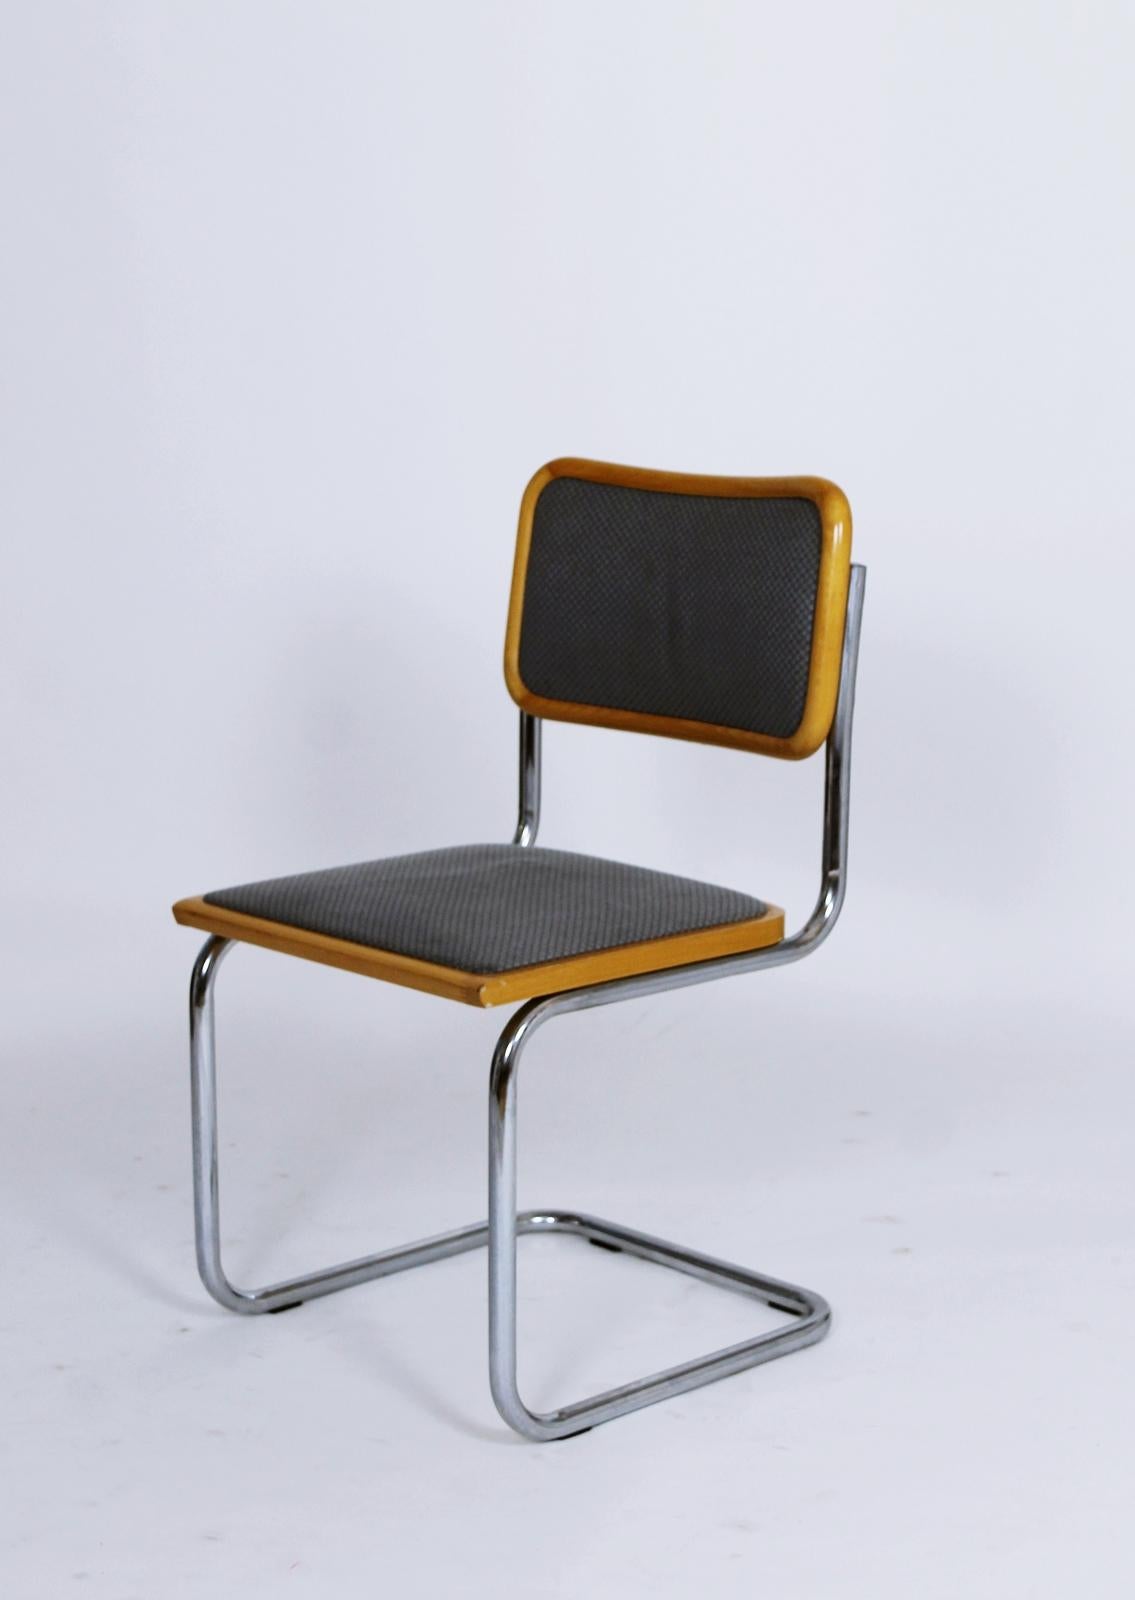 This Cesca chair was manufactured in Italy in 1990s based on the 1928 design of the Hungarian designer, Breuer Marcell /Marcel Breuer. Breuer was an important member of Bauhaus, teached in Weimar, so this iconic chair was designed in Germany. With